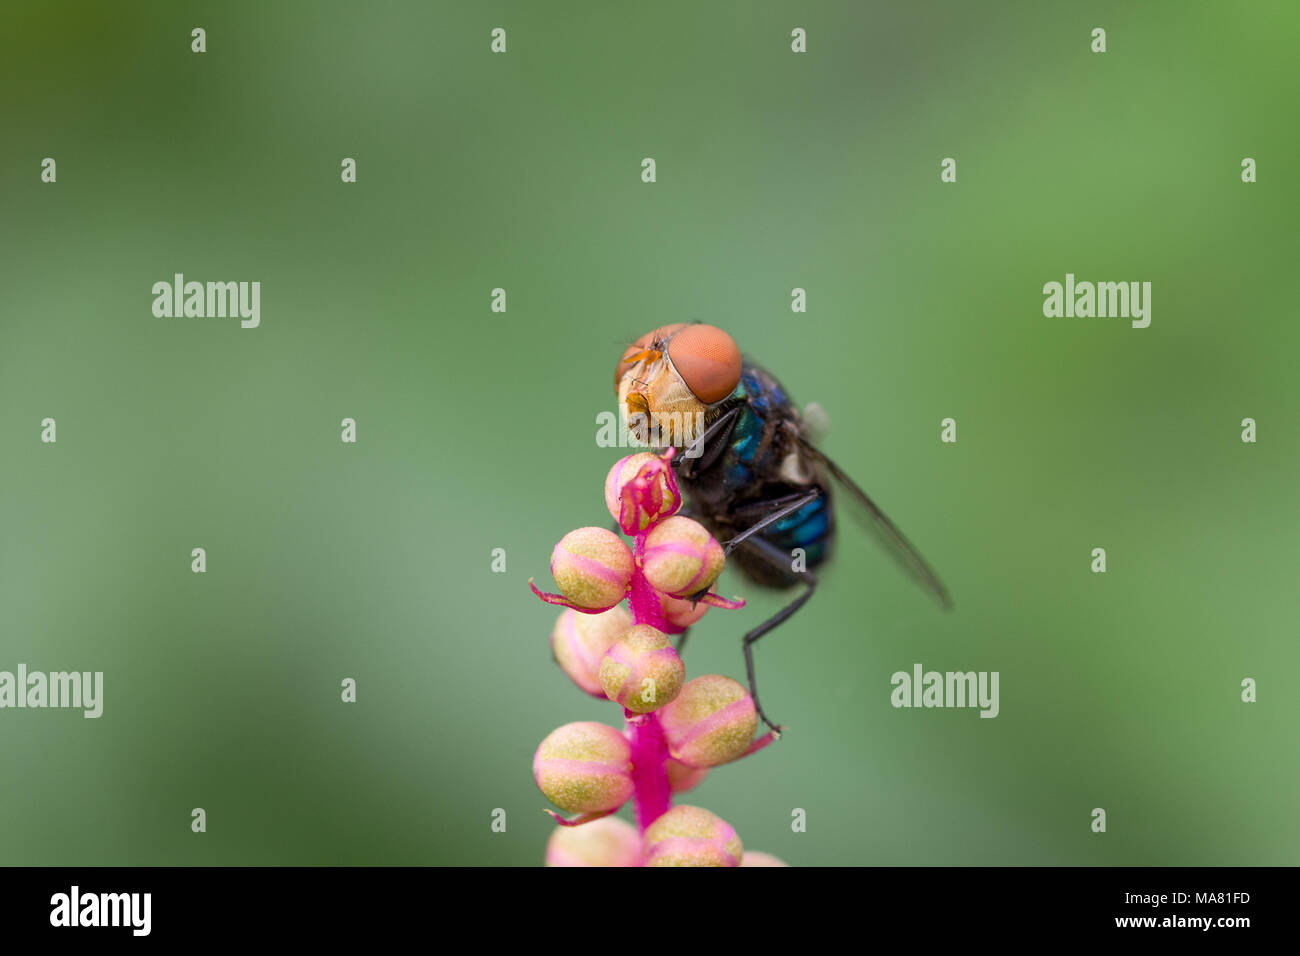 A close up macro shot of a blue bottle fly on pink attractive plant with a blurred green back ground. Stock Photo